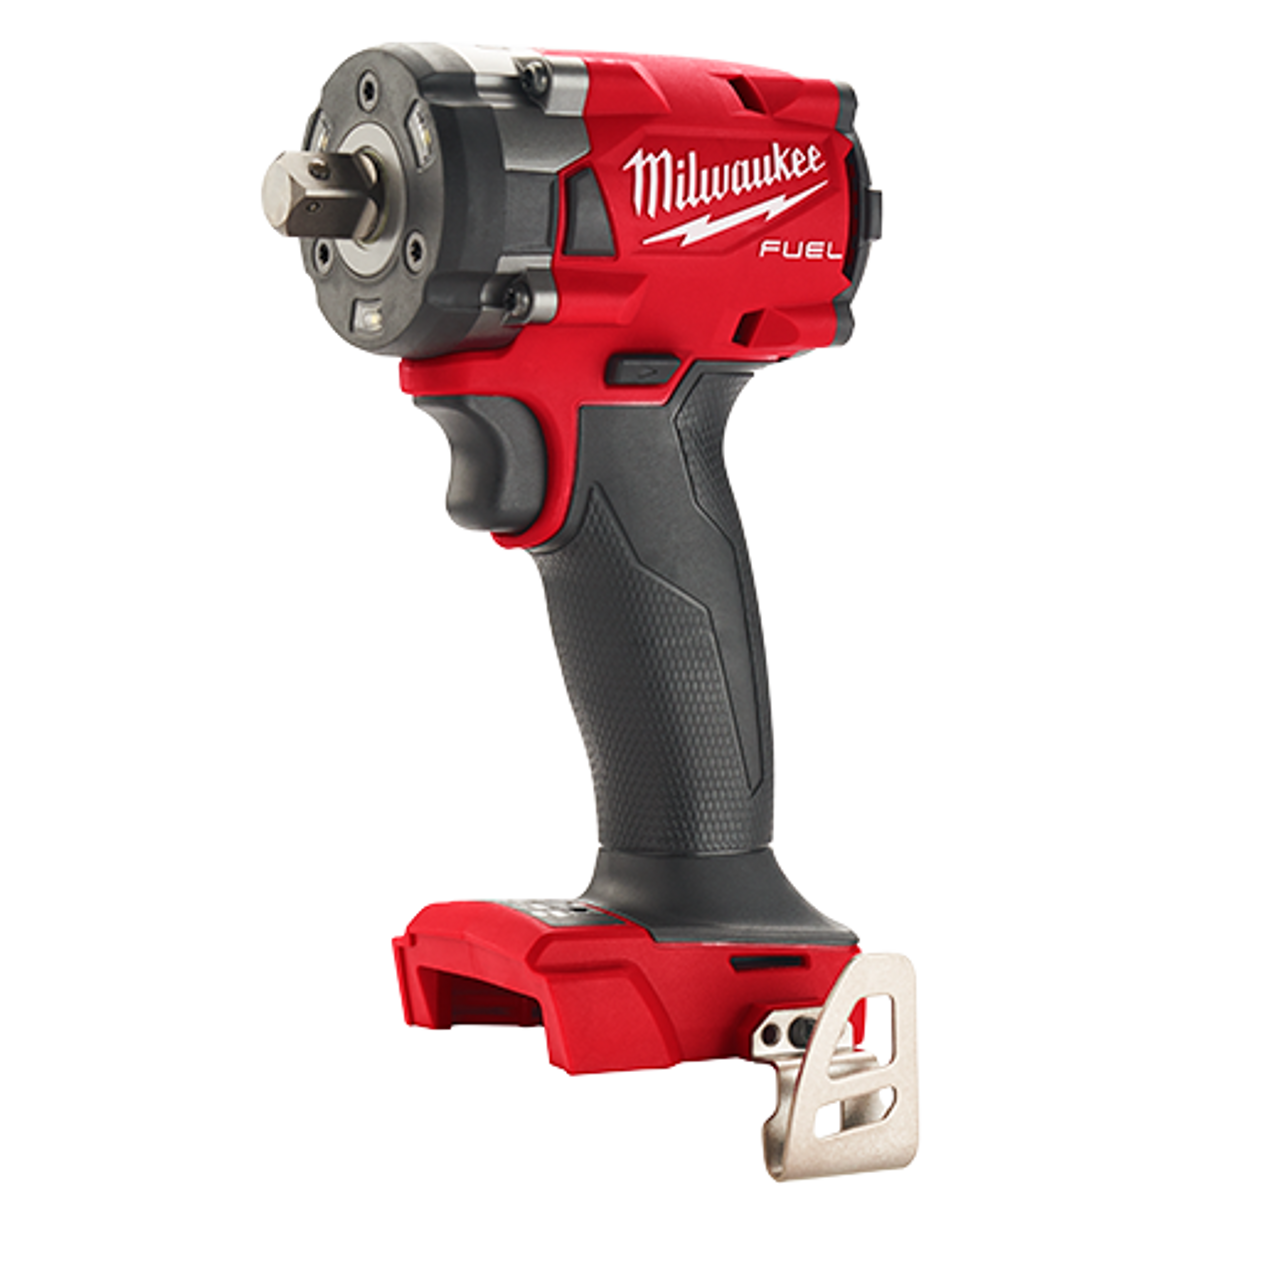 M18 FUEL 1/2 Compact Impact Wrench w/ Pin Detent Bare Tool